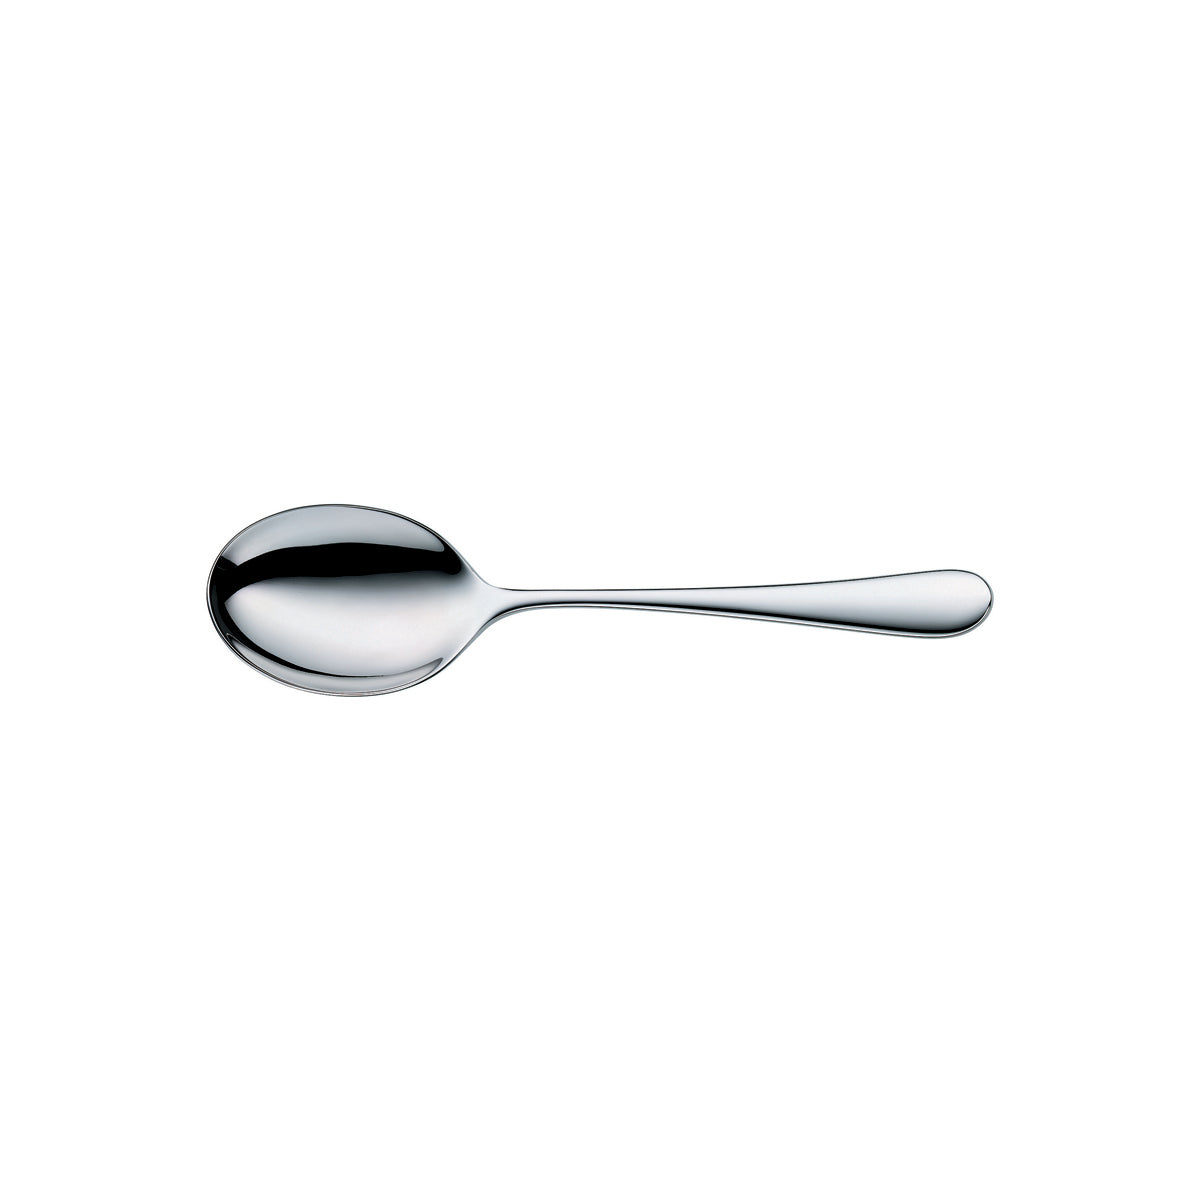 12.1916.6040 WMF Signum Vegetable Serving Spoon Stainless Steel Tomkin Australia Hospitality Supplies